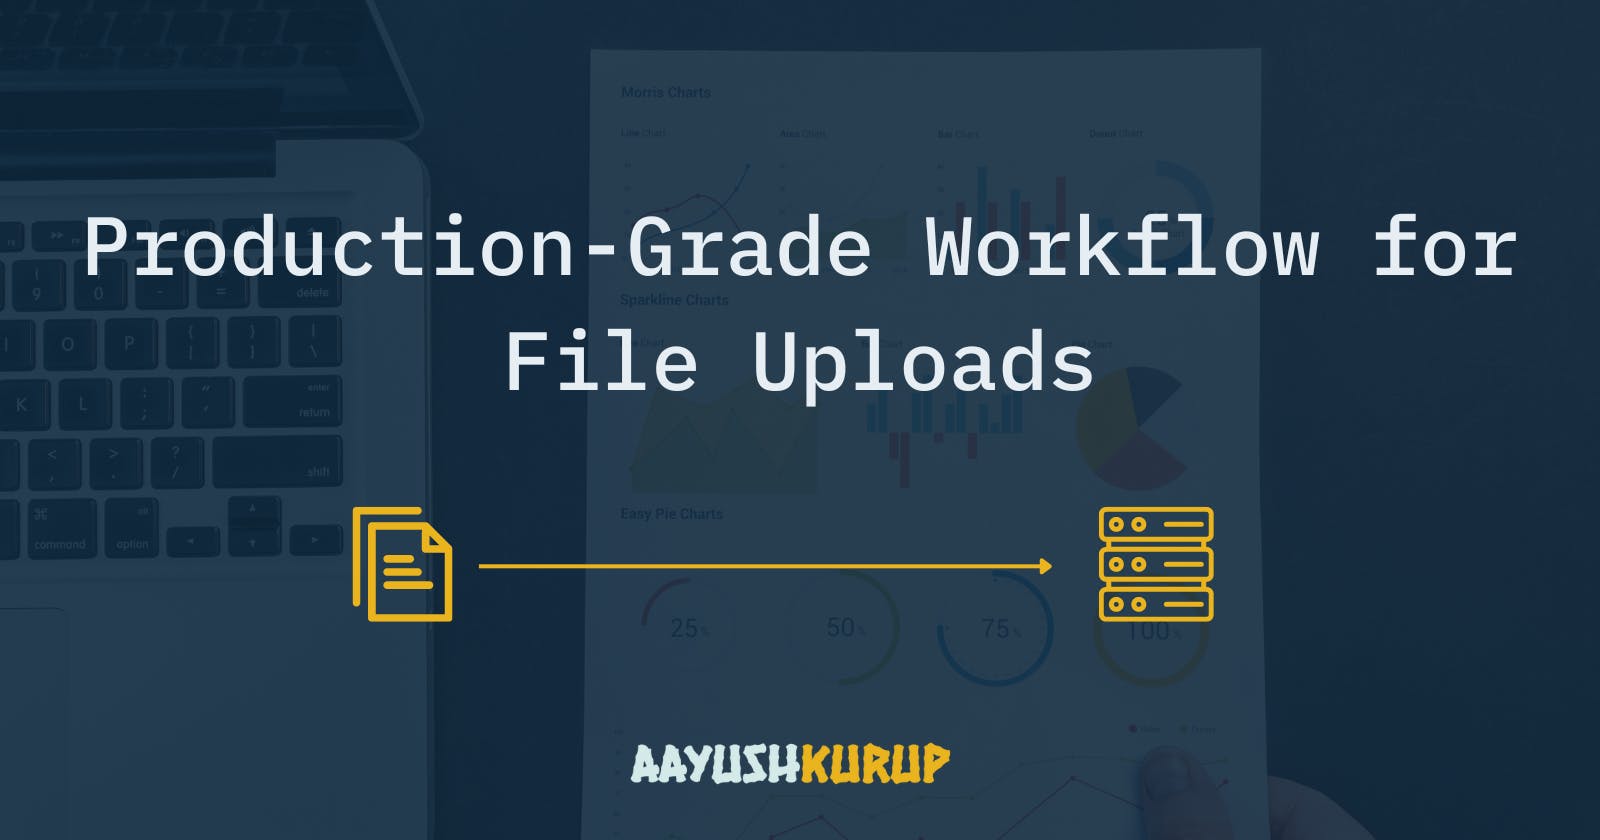 Production-Grade Workflow for File Uploads